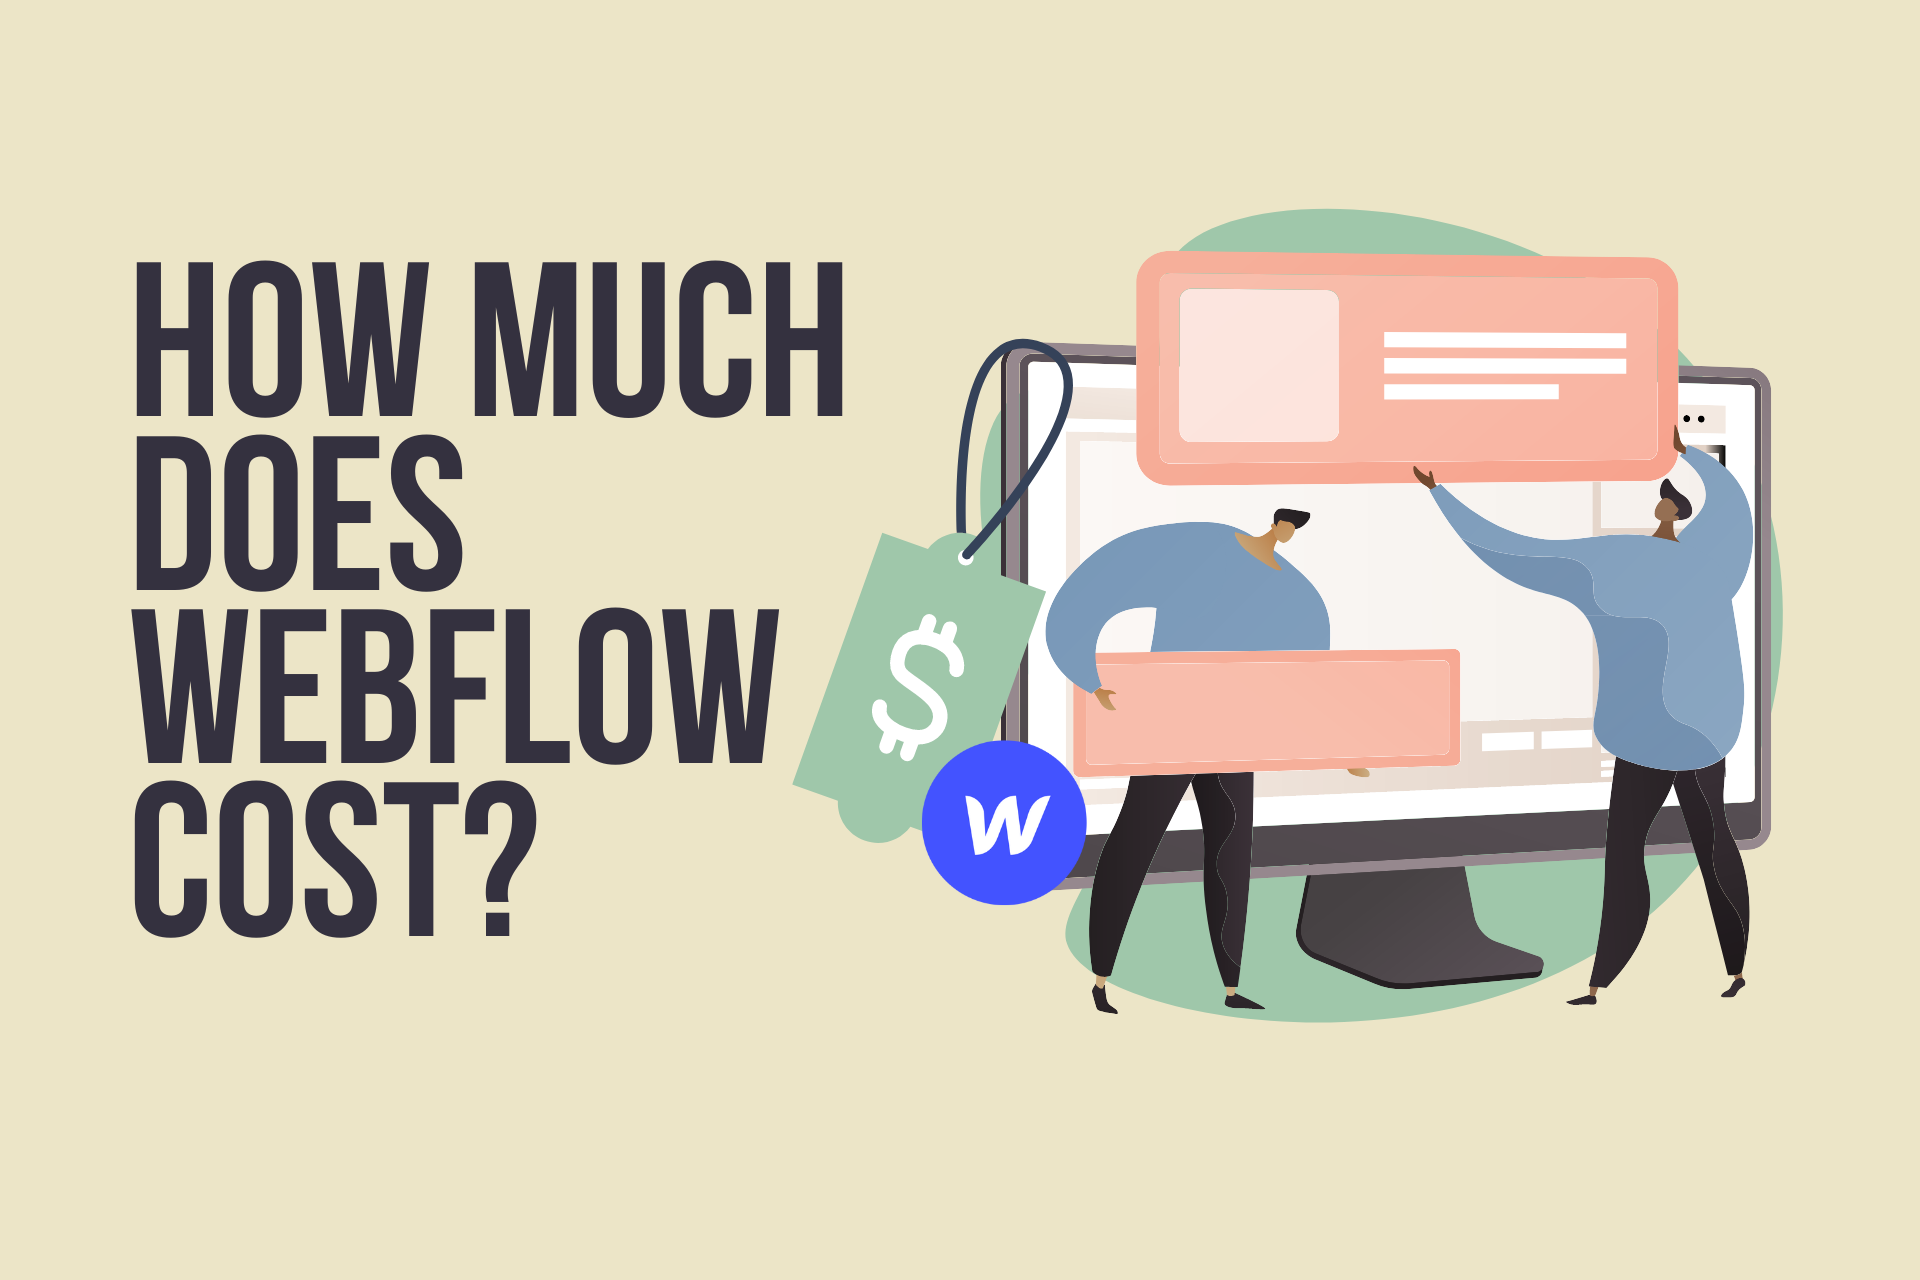 How Much Does Webflow Cost?